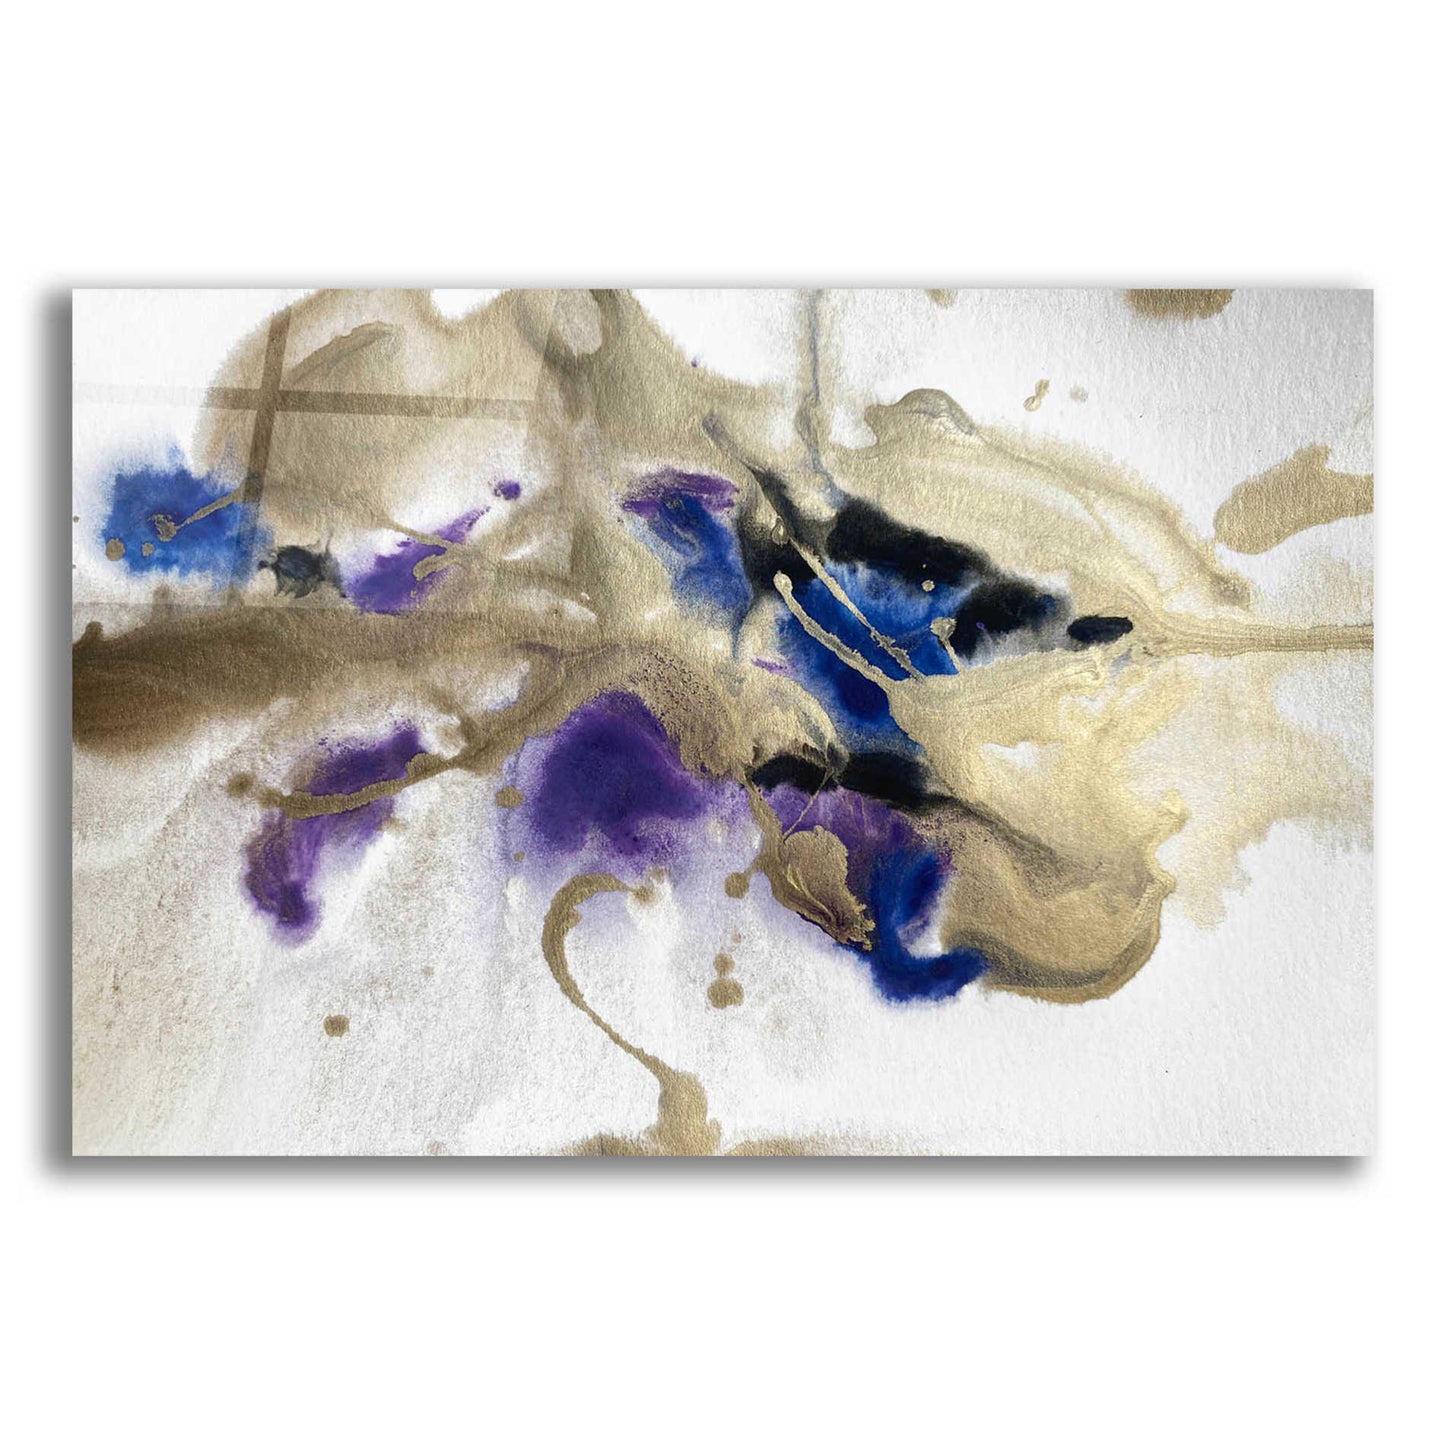 Epic Art 'Gold In Blue Watercolor Abstract 2' by Irena Orlov Acrylic Glass Wall Art,24x16